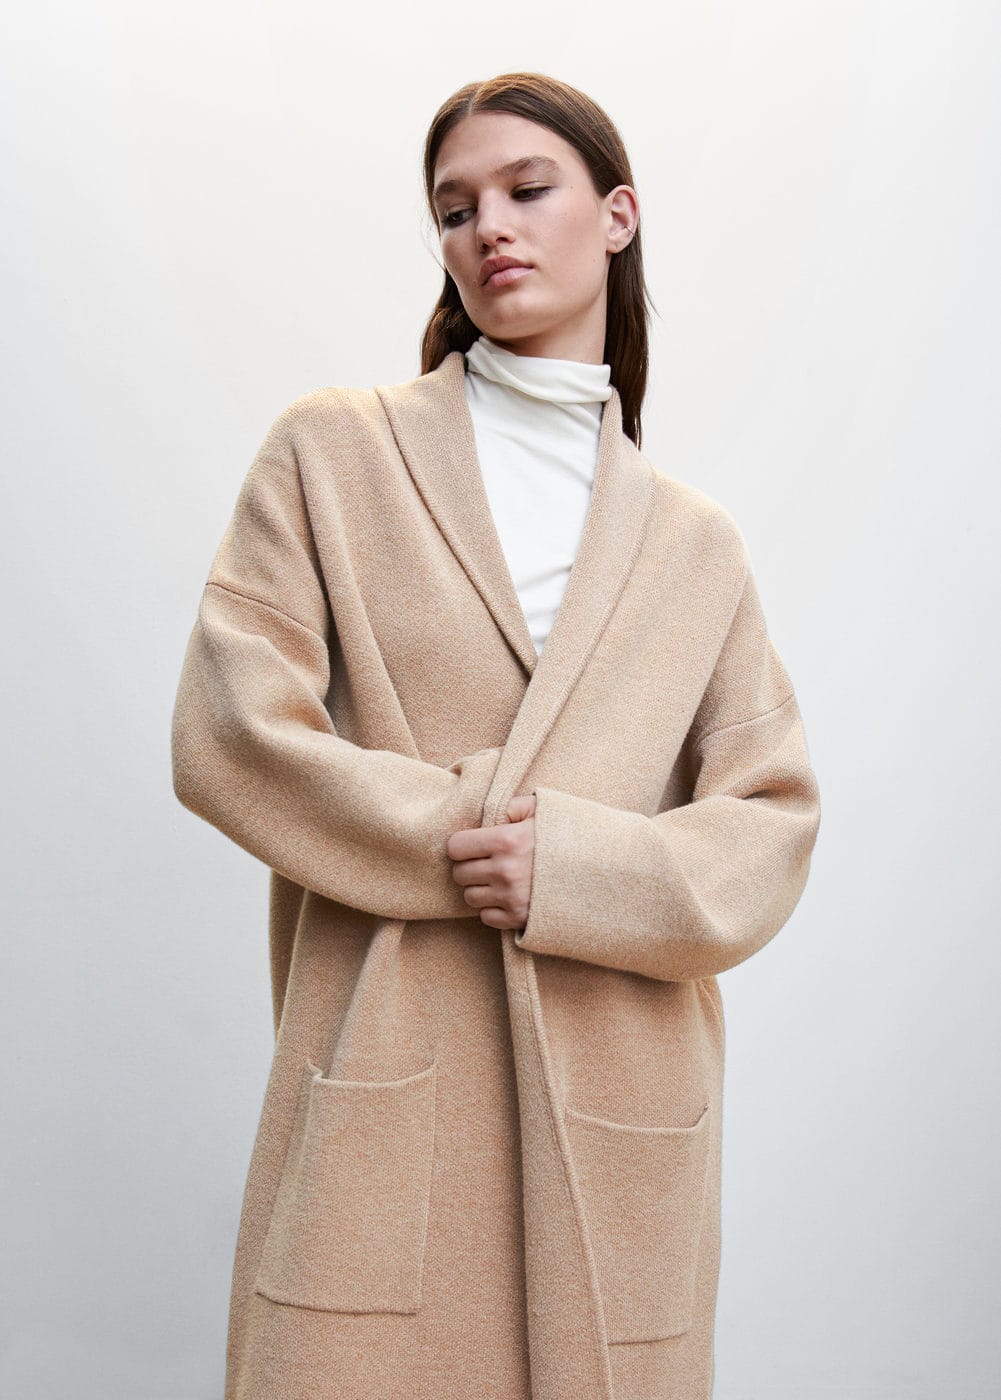 The 22 Sweater-Coats for Women Wear All Season | Who What